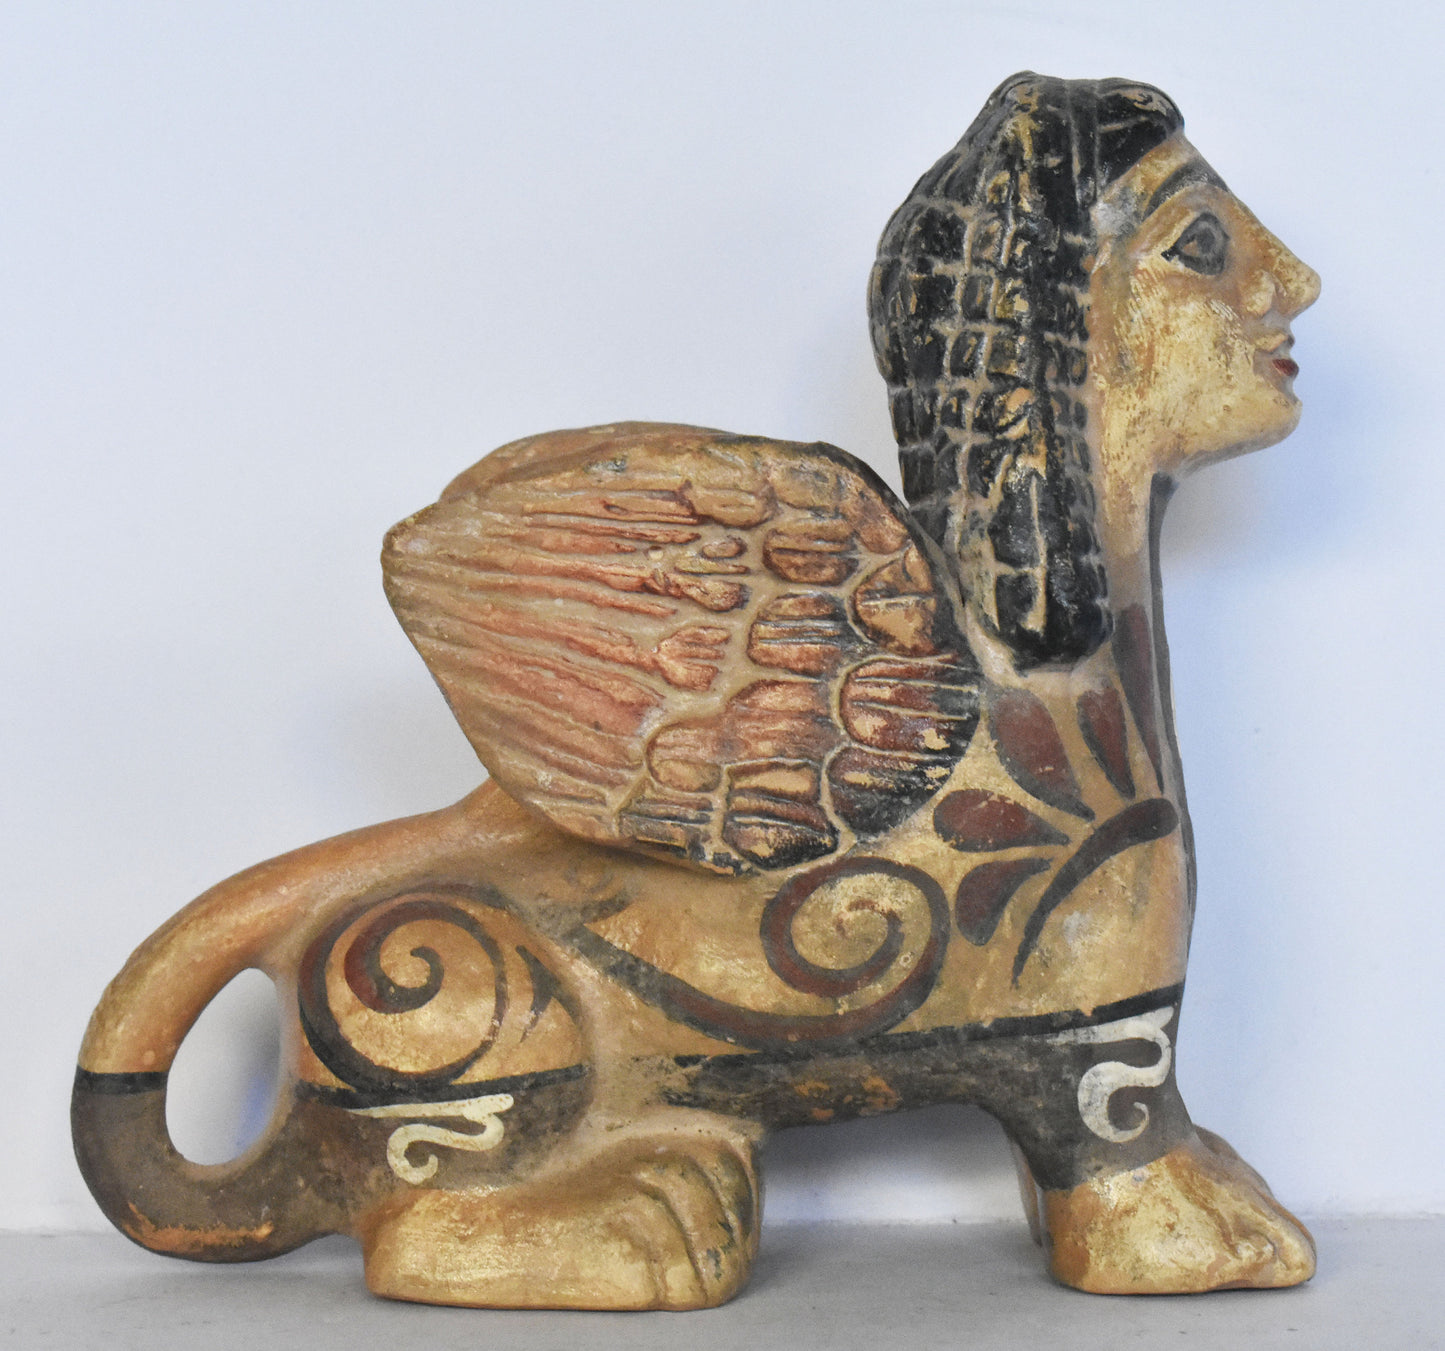 Sphinx -  Attica, Athens - 600 BC - Composition of the Mortal and the Immortal - Miniature - Museum Reproduction - Ceramic Artifact